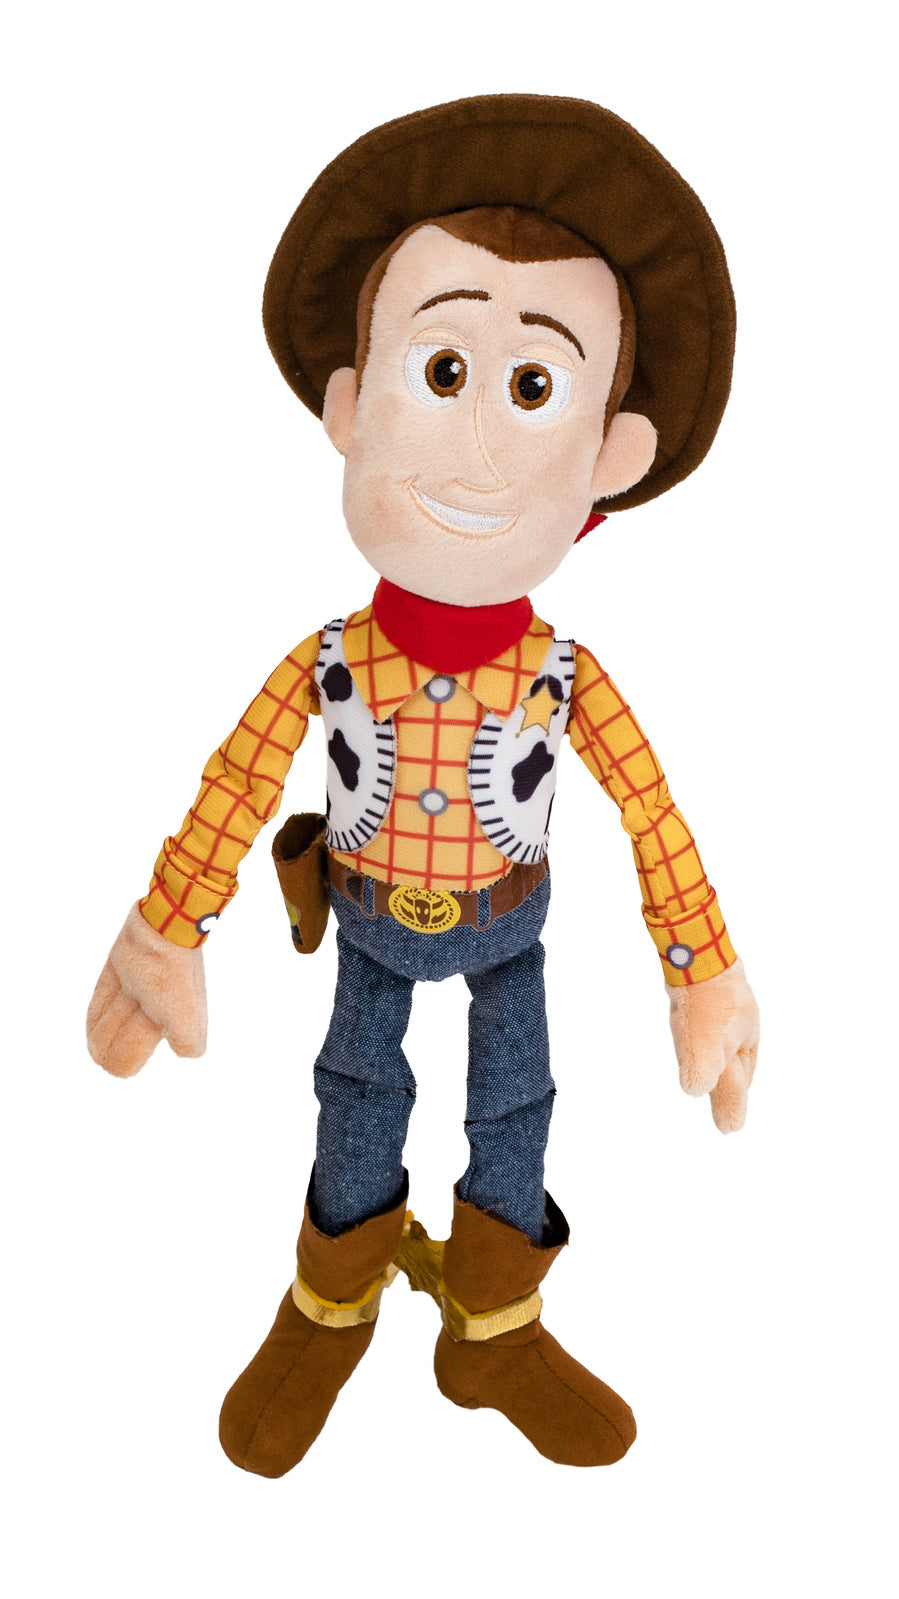 Toy Story 4 Woody Plush (14-inch)